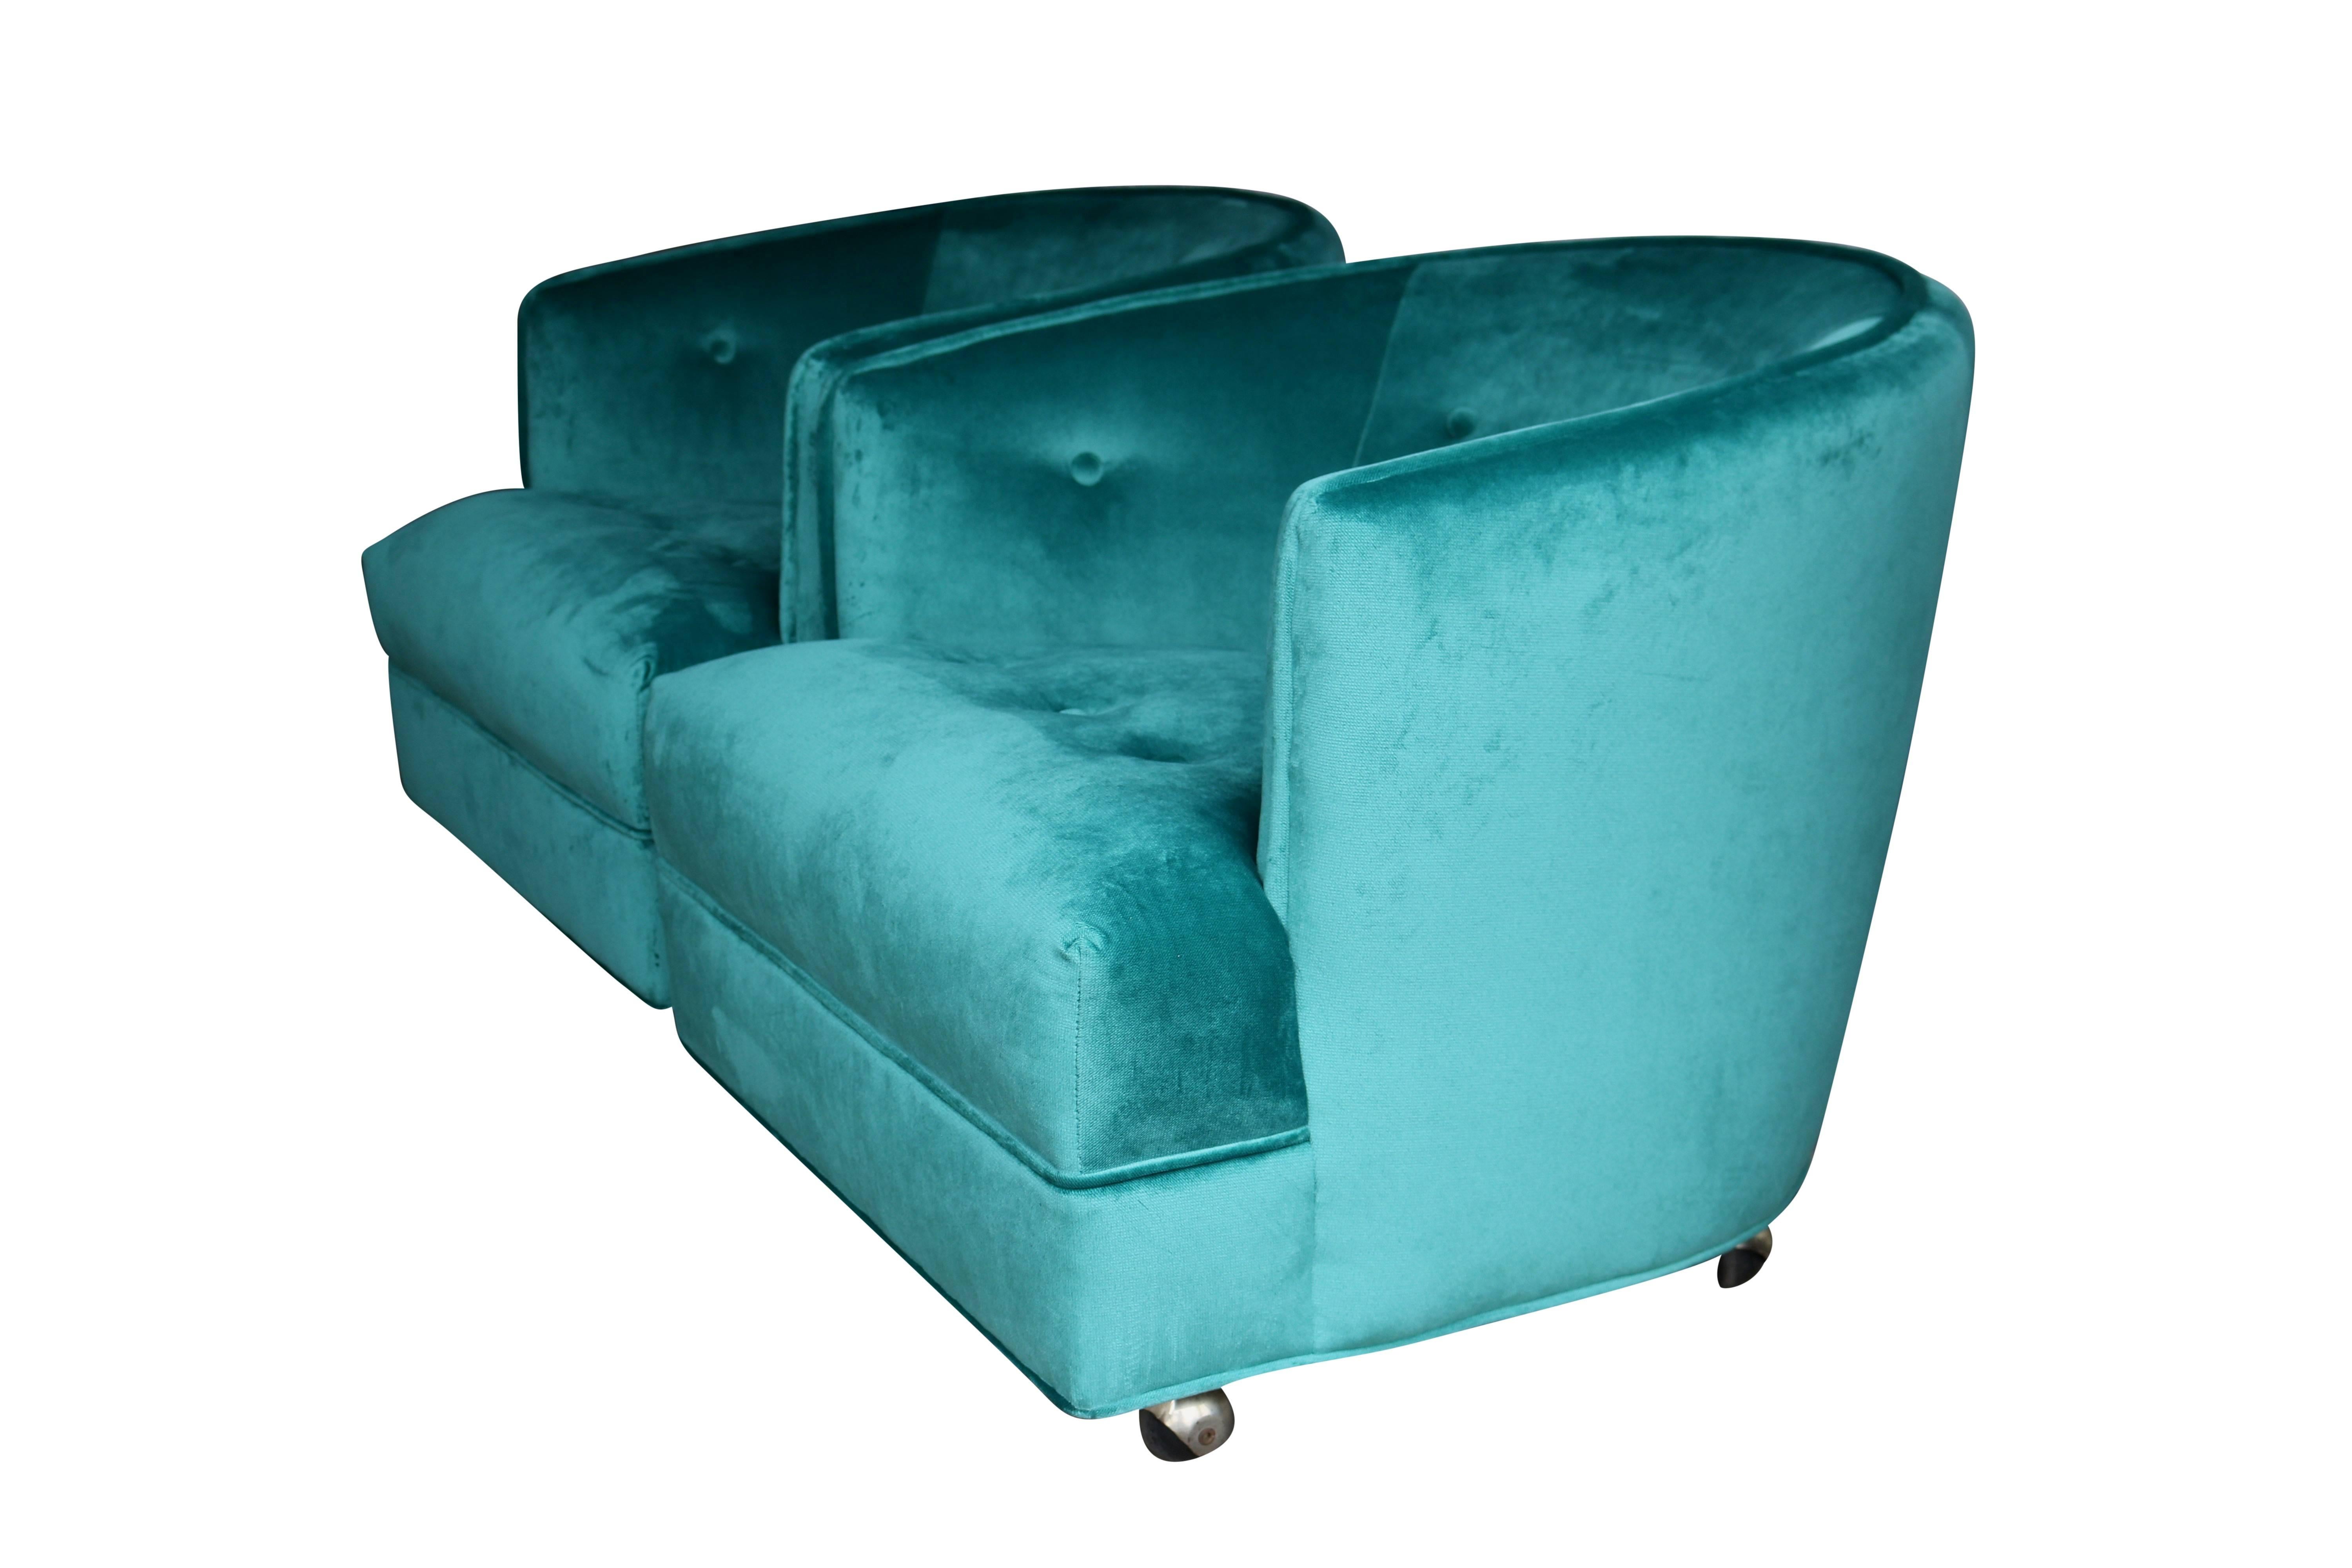 Freshly upholstered in a sensual velvet, these club chairs are comfortable and chic. On casters could easily be swapped out for legs if desired.